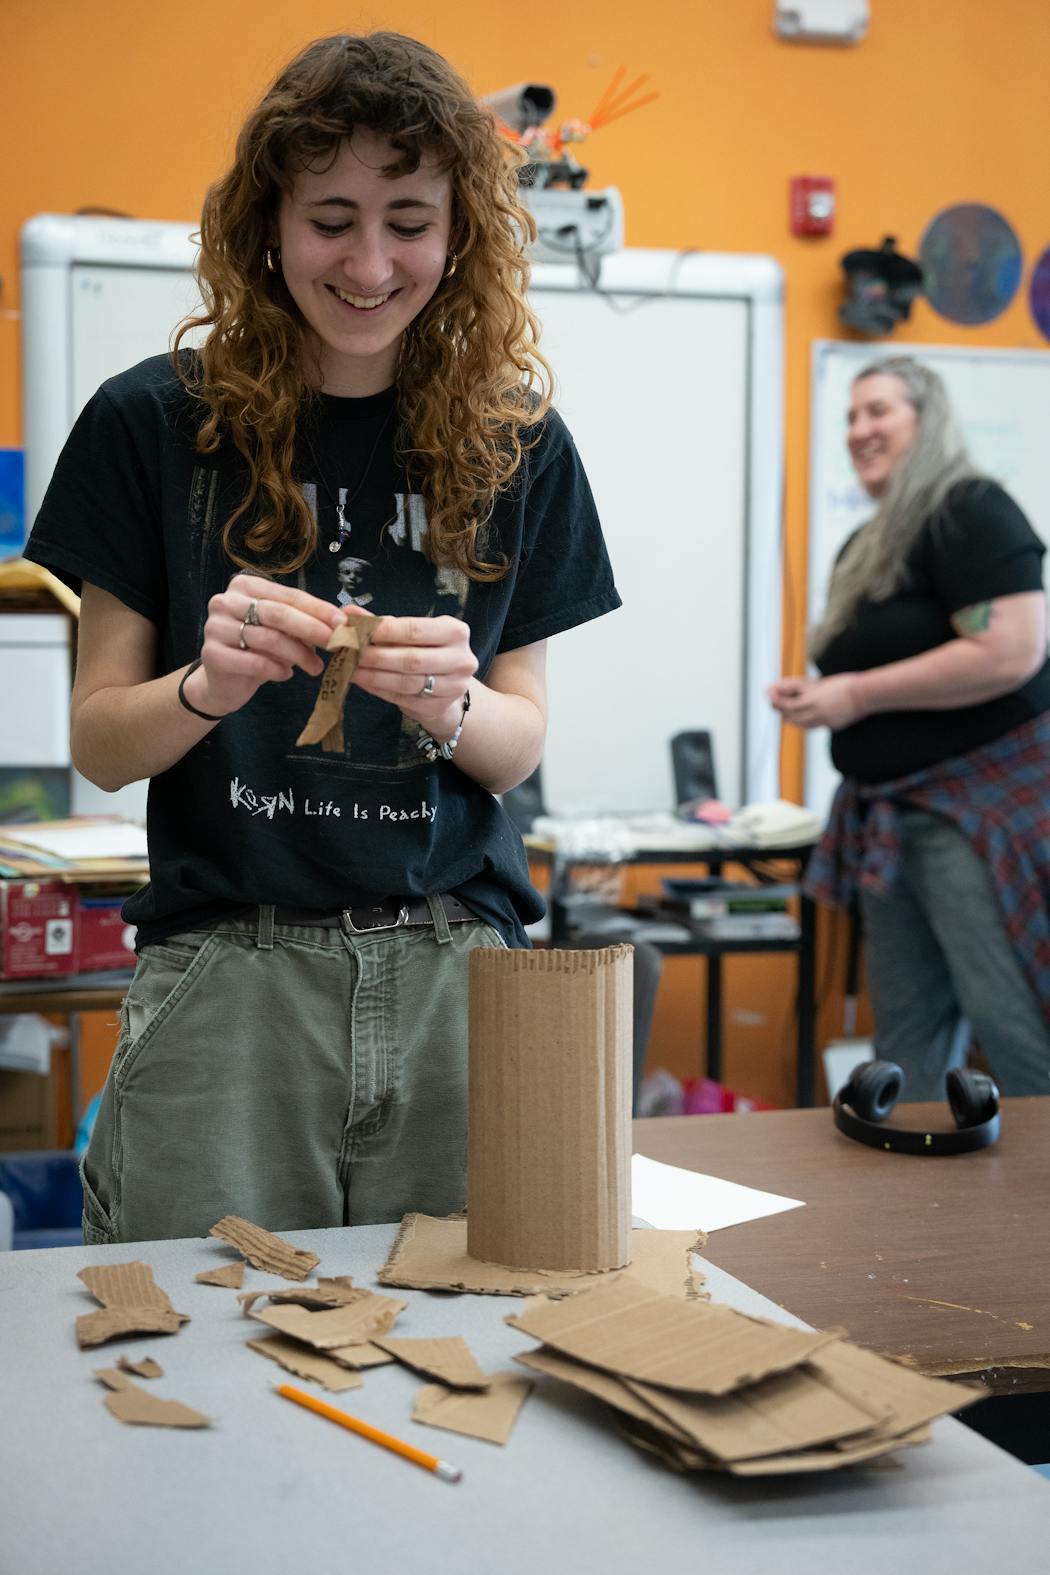 Echo Columb, a junior at Avalon in St. Paul, creates an art structure out of cardboard. Teacher Mickey Jurewicz. background, said the students' joy at having their work displayed was evident: 